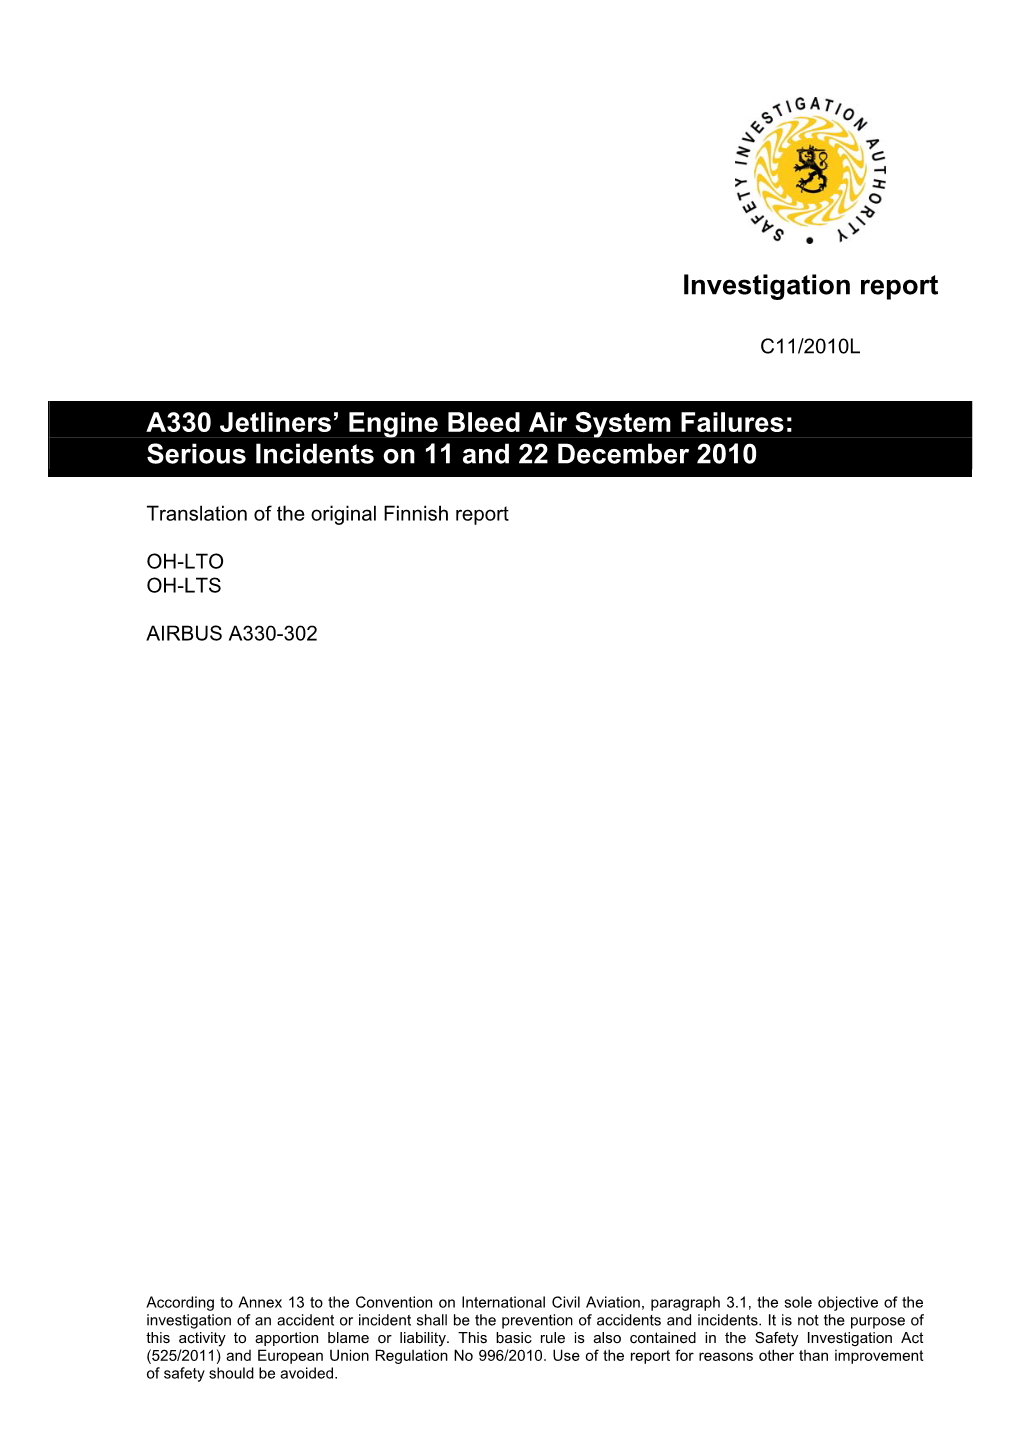 A330 Jetliners' Engine Bleed Air System Failures